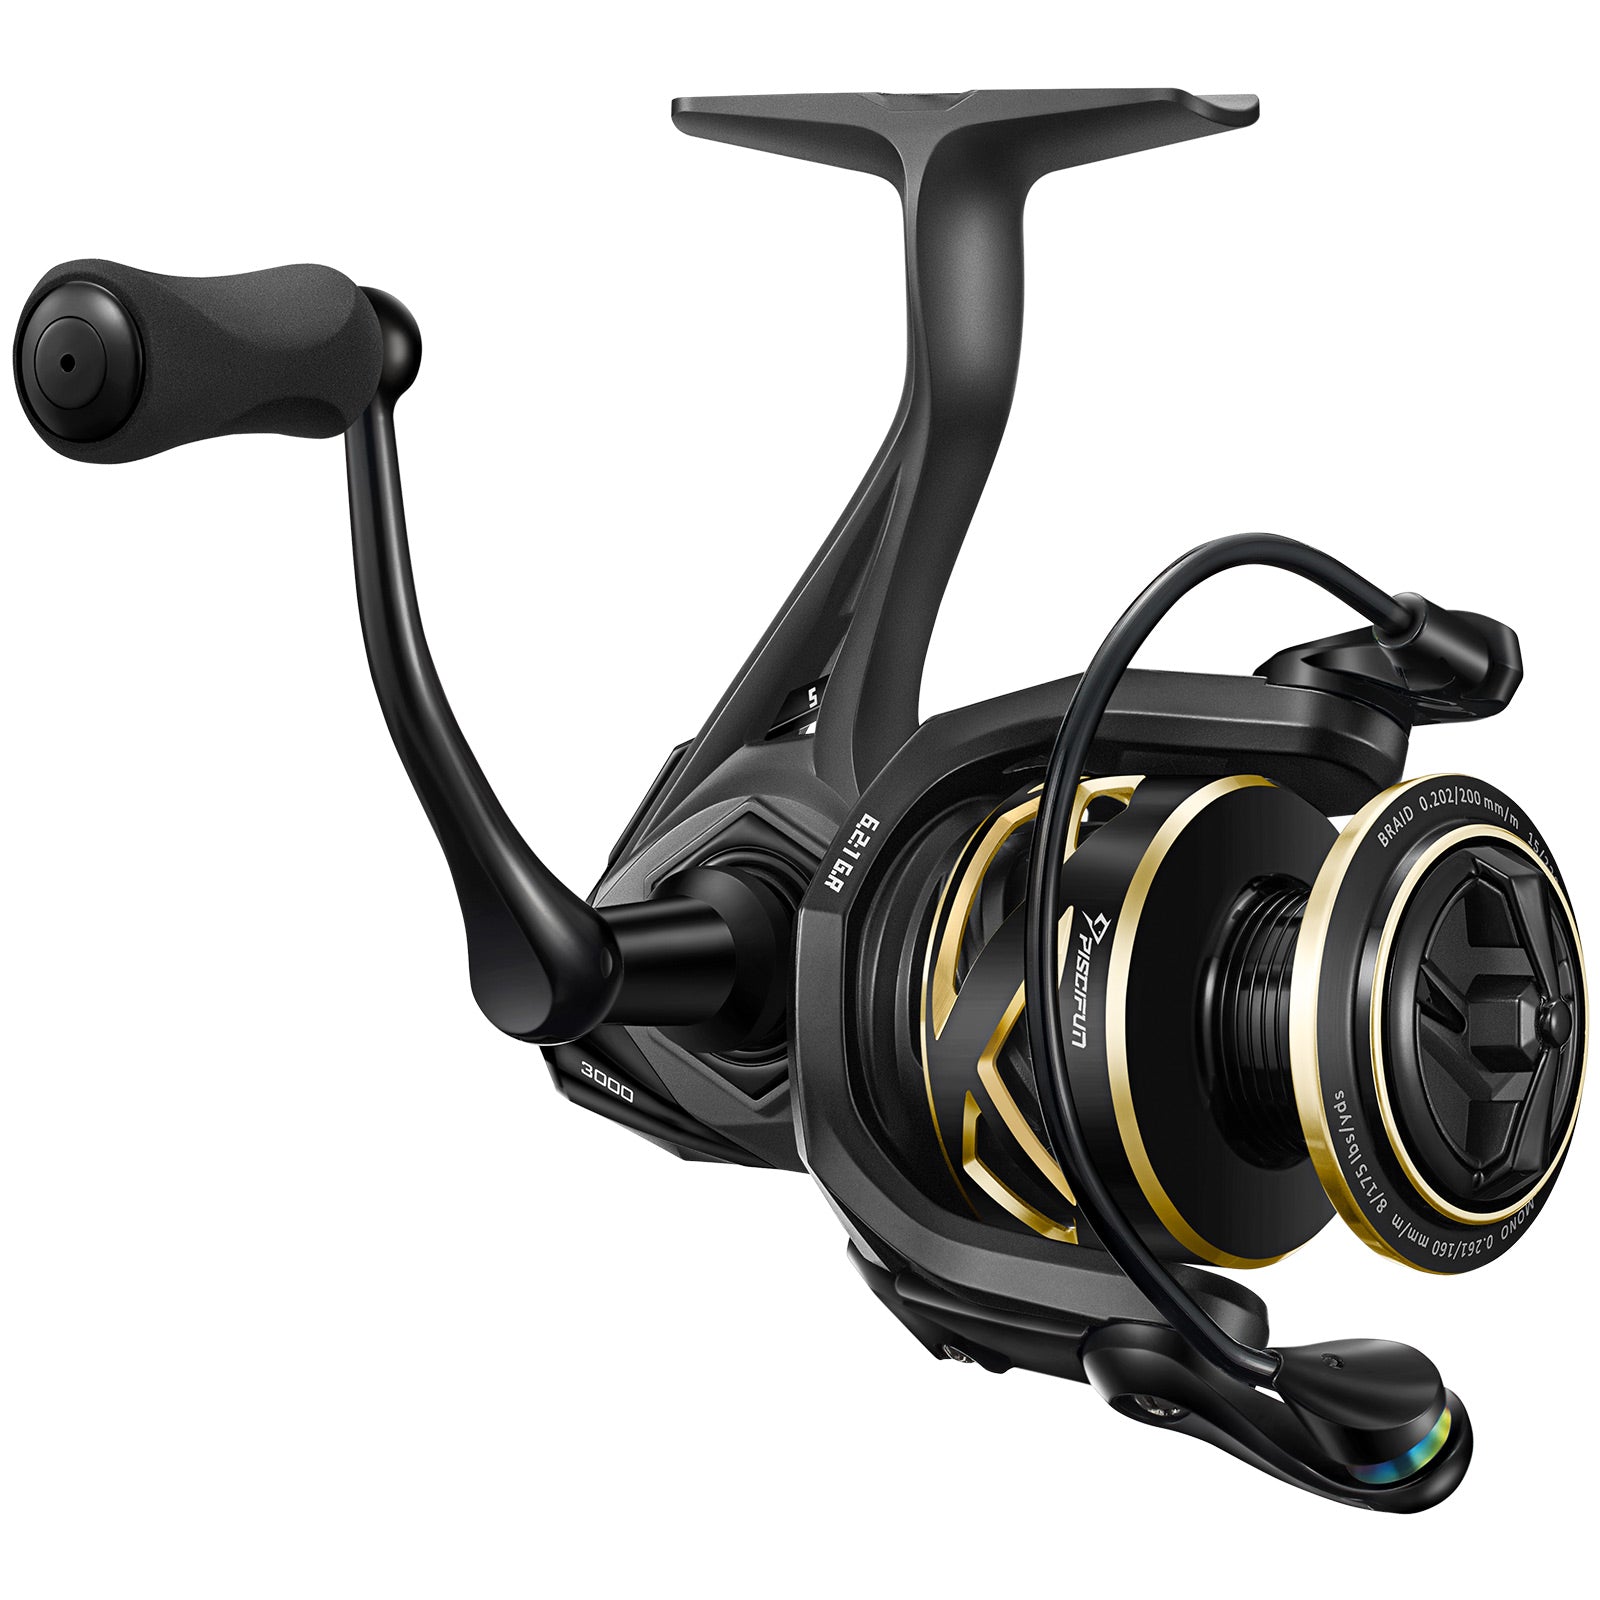 Piscifun® Auric Spinning Reels - Saltwater and Freshwater Spinning Fis, 5000-6.2:1